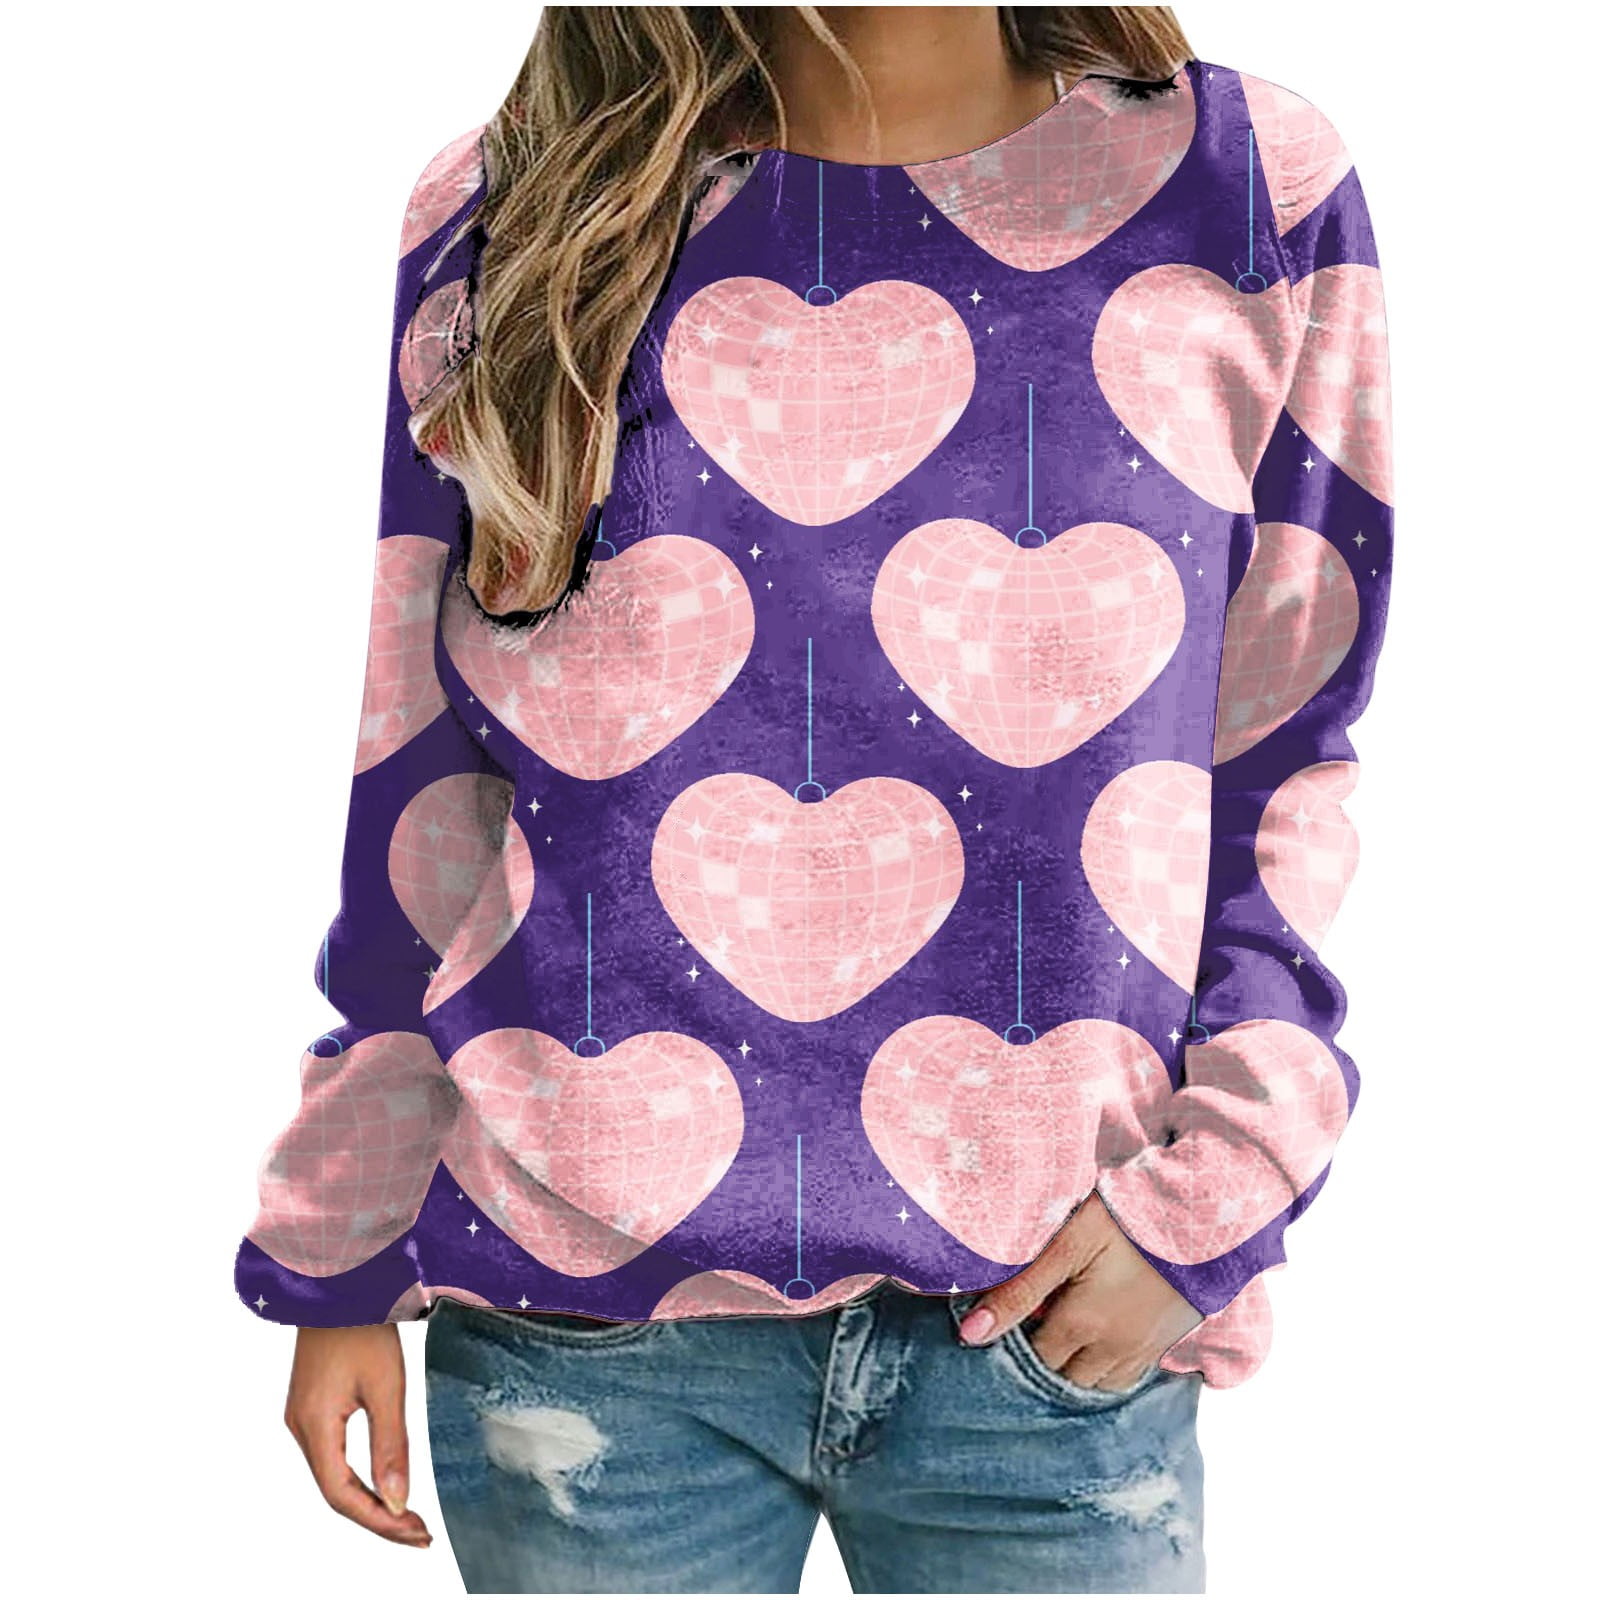 RQYYD Womens Colorful Heart Graphic Print Sweatshirts Long Sleeve Crew Neck  Pullover Valentines Day Shirts Lightweight Tops Purple XL 